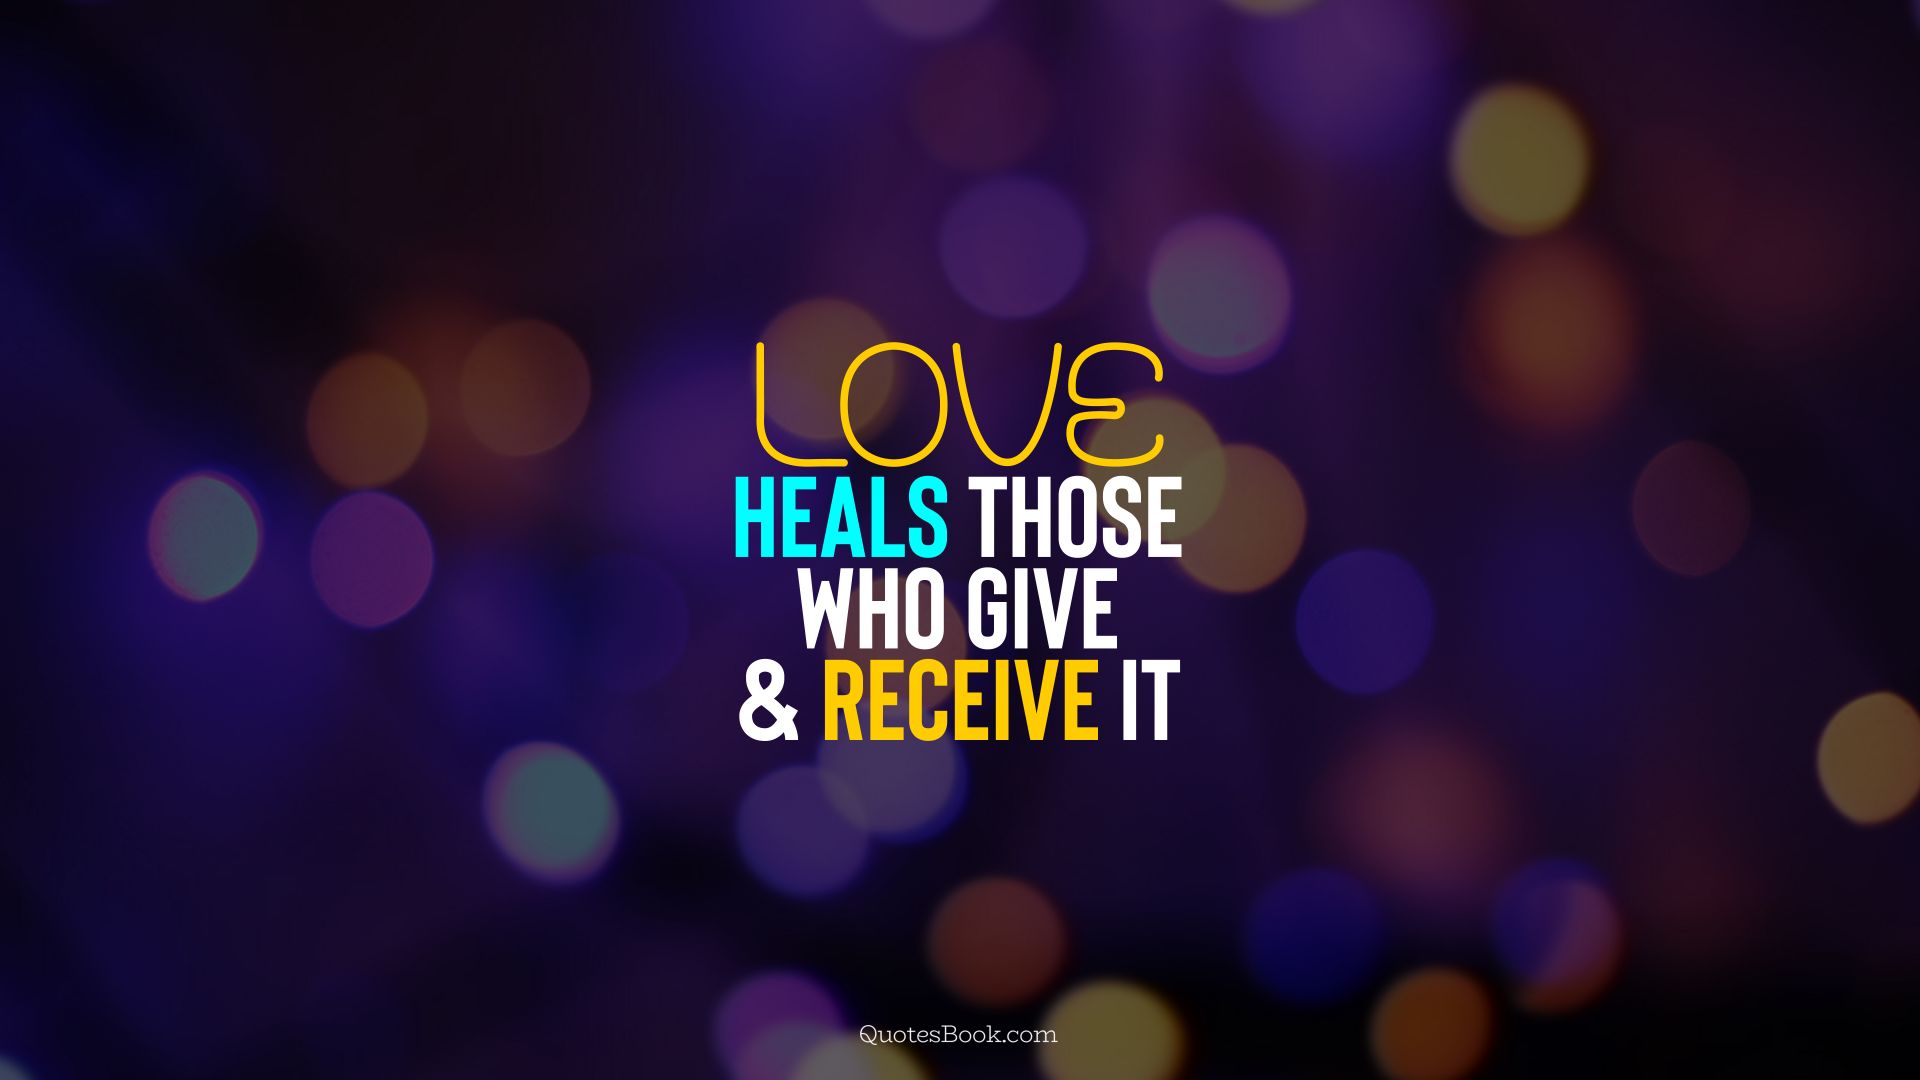 Love heals those who give and receive it. - Quote by QuotesBook